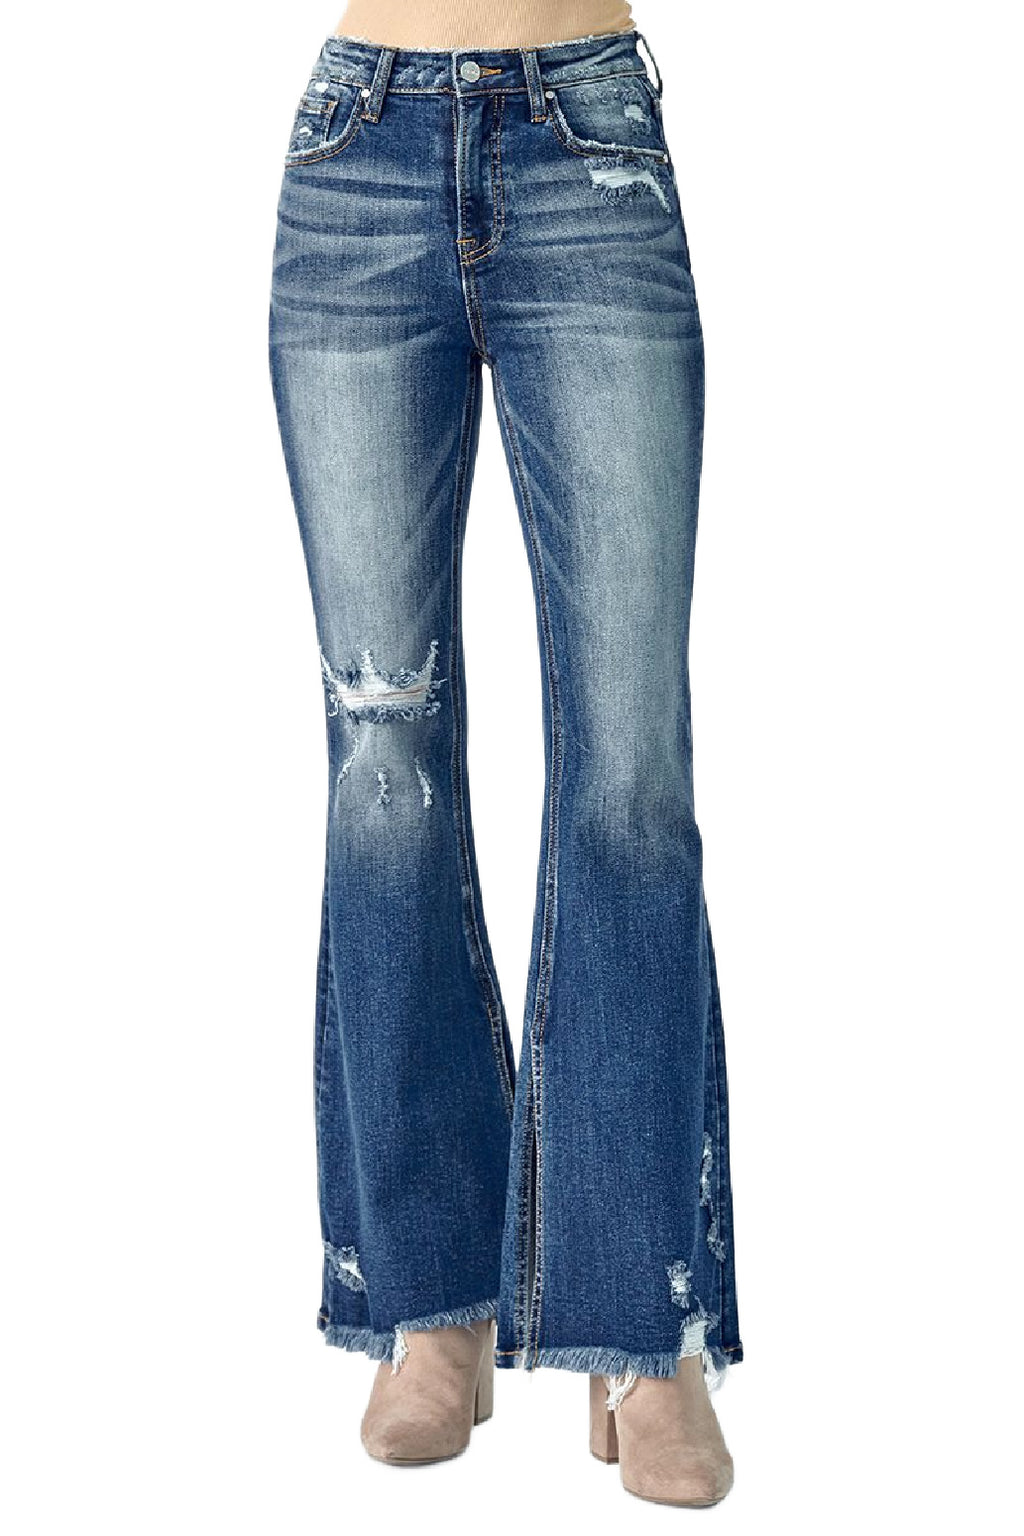 Risen Flare Distressed High Rise Slit Jeans